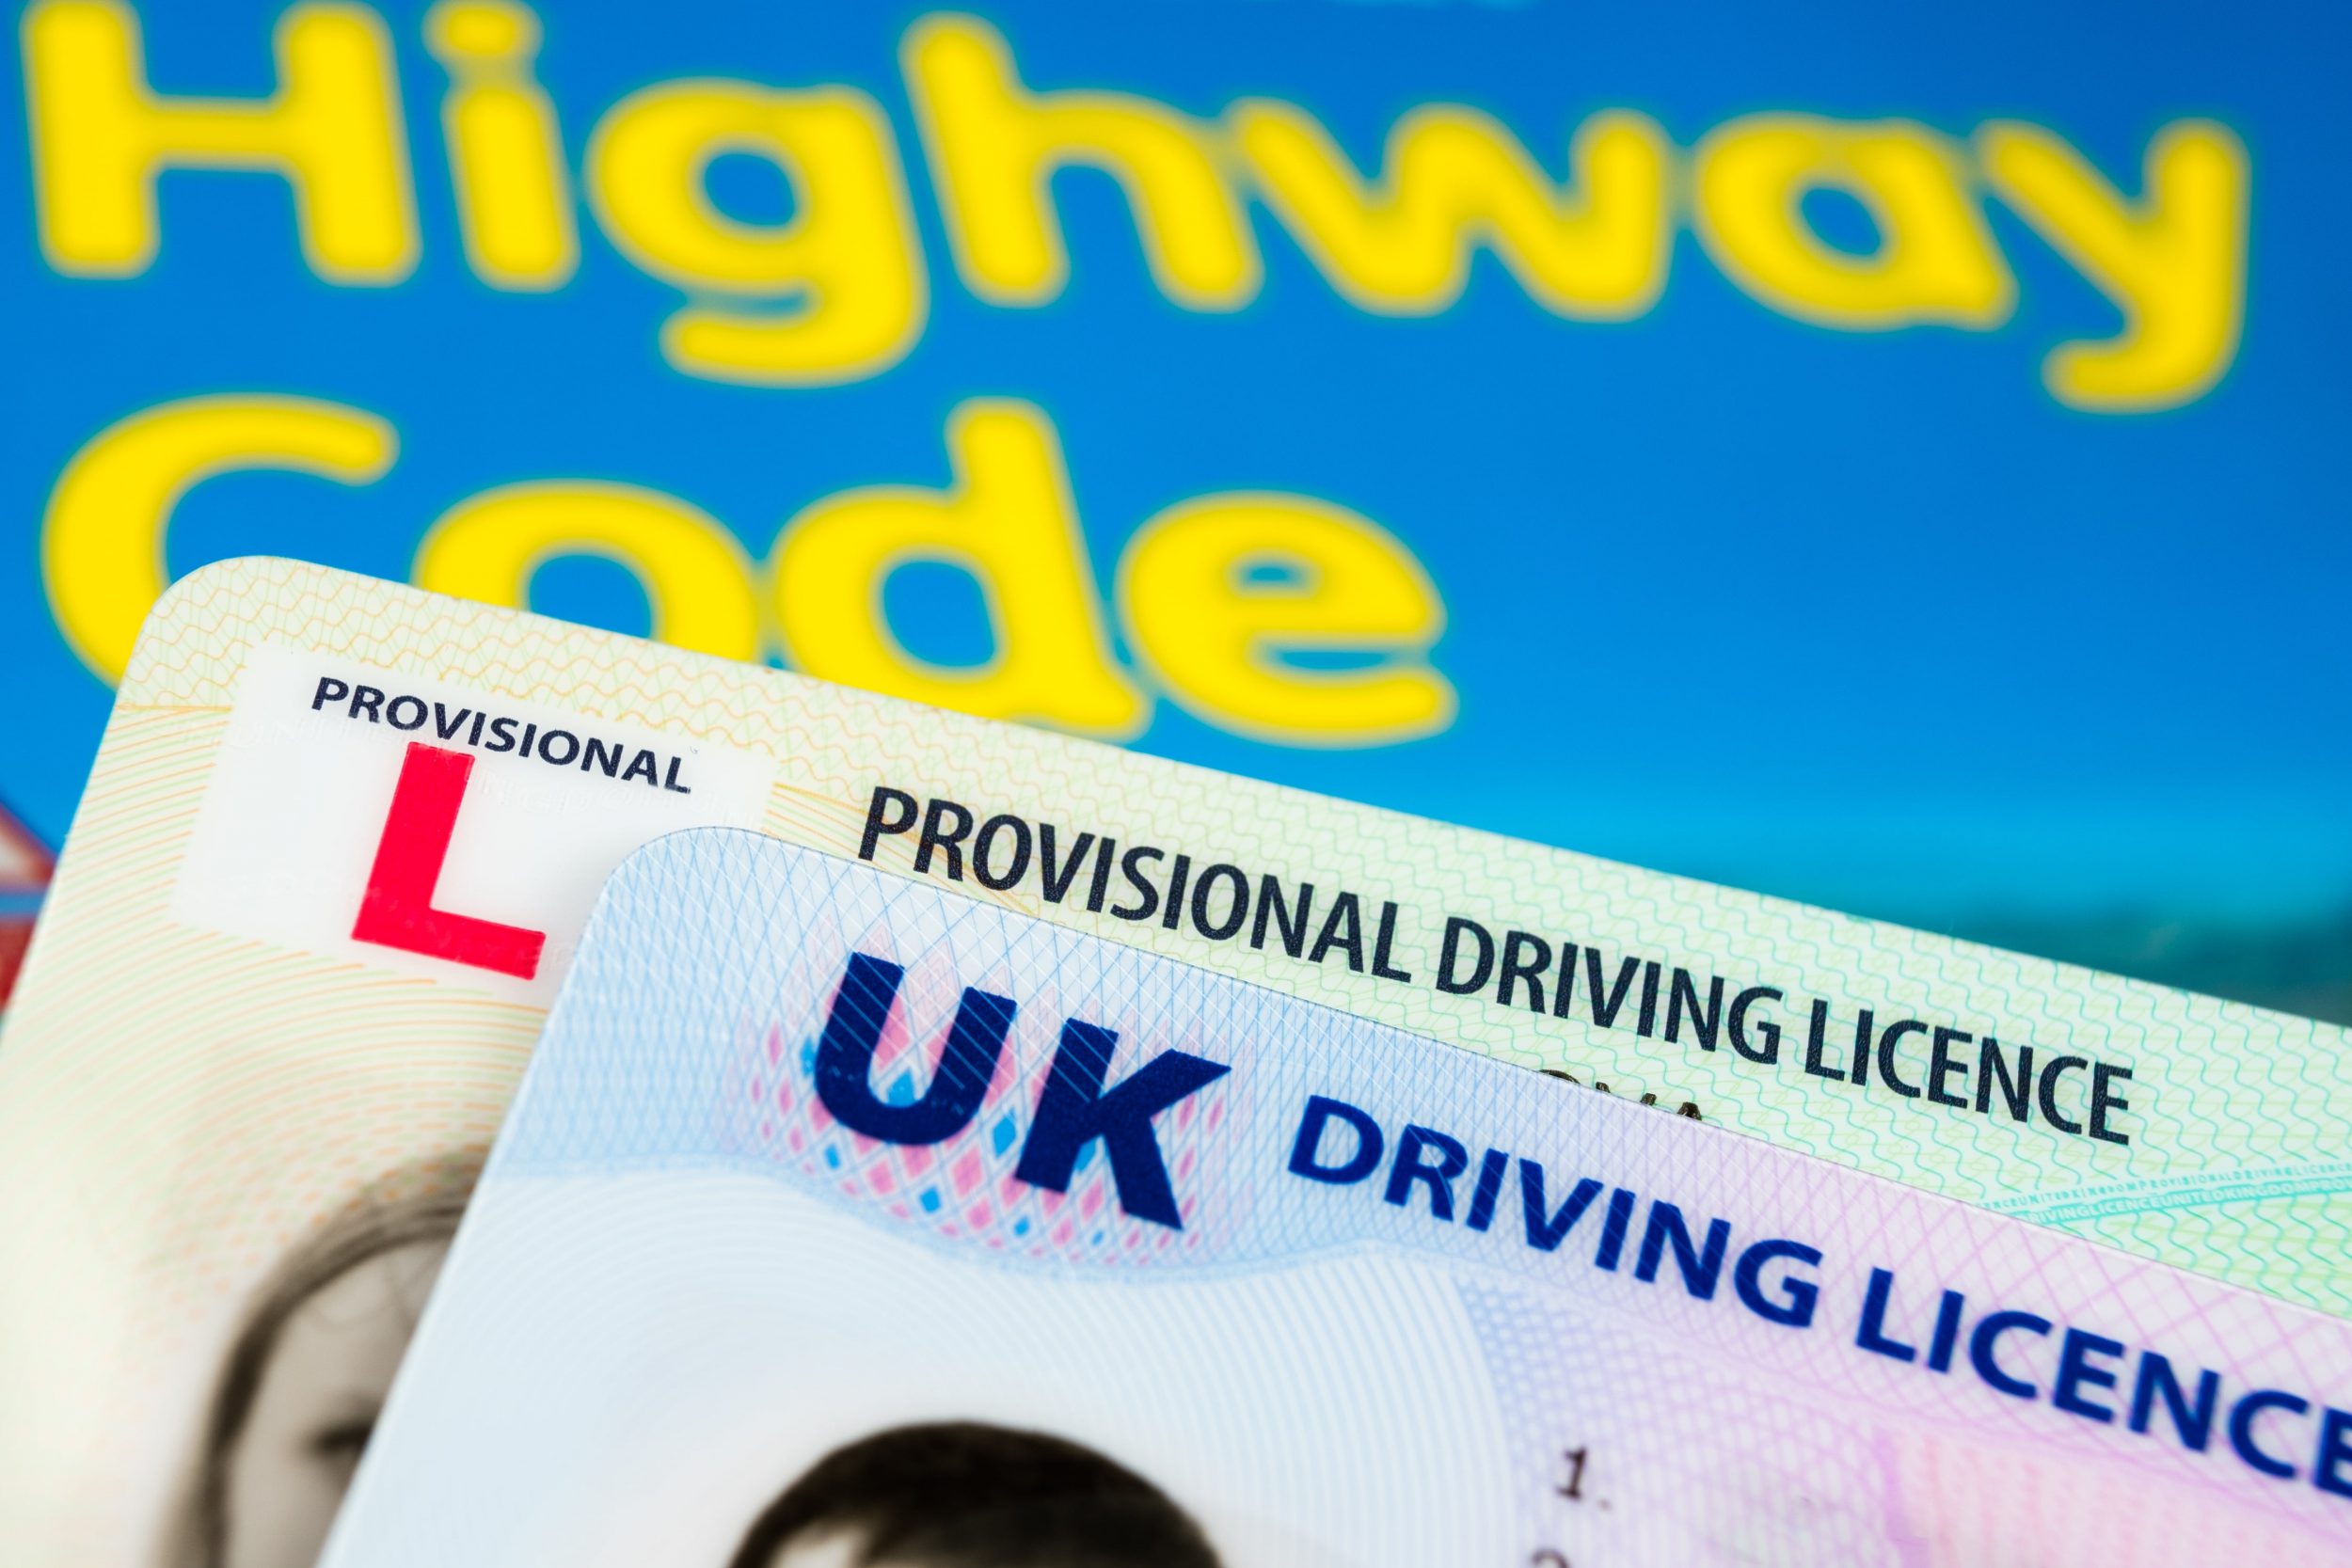 Highway code book with provisional license